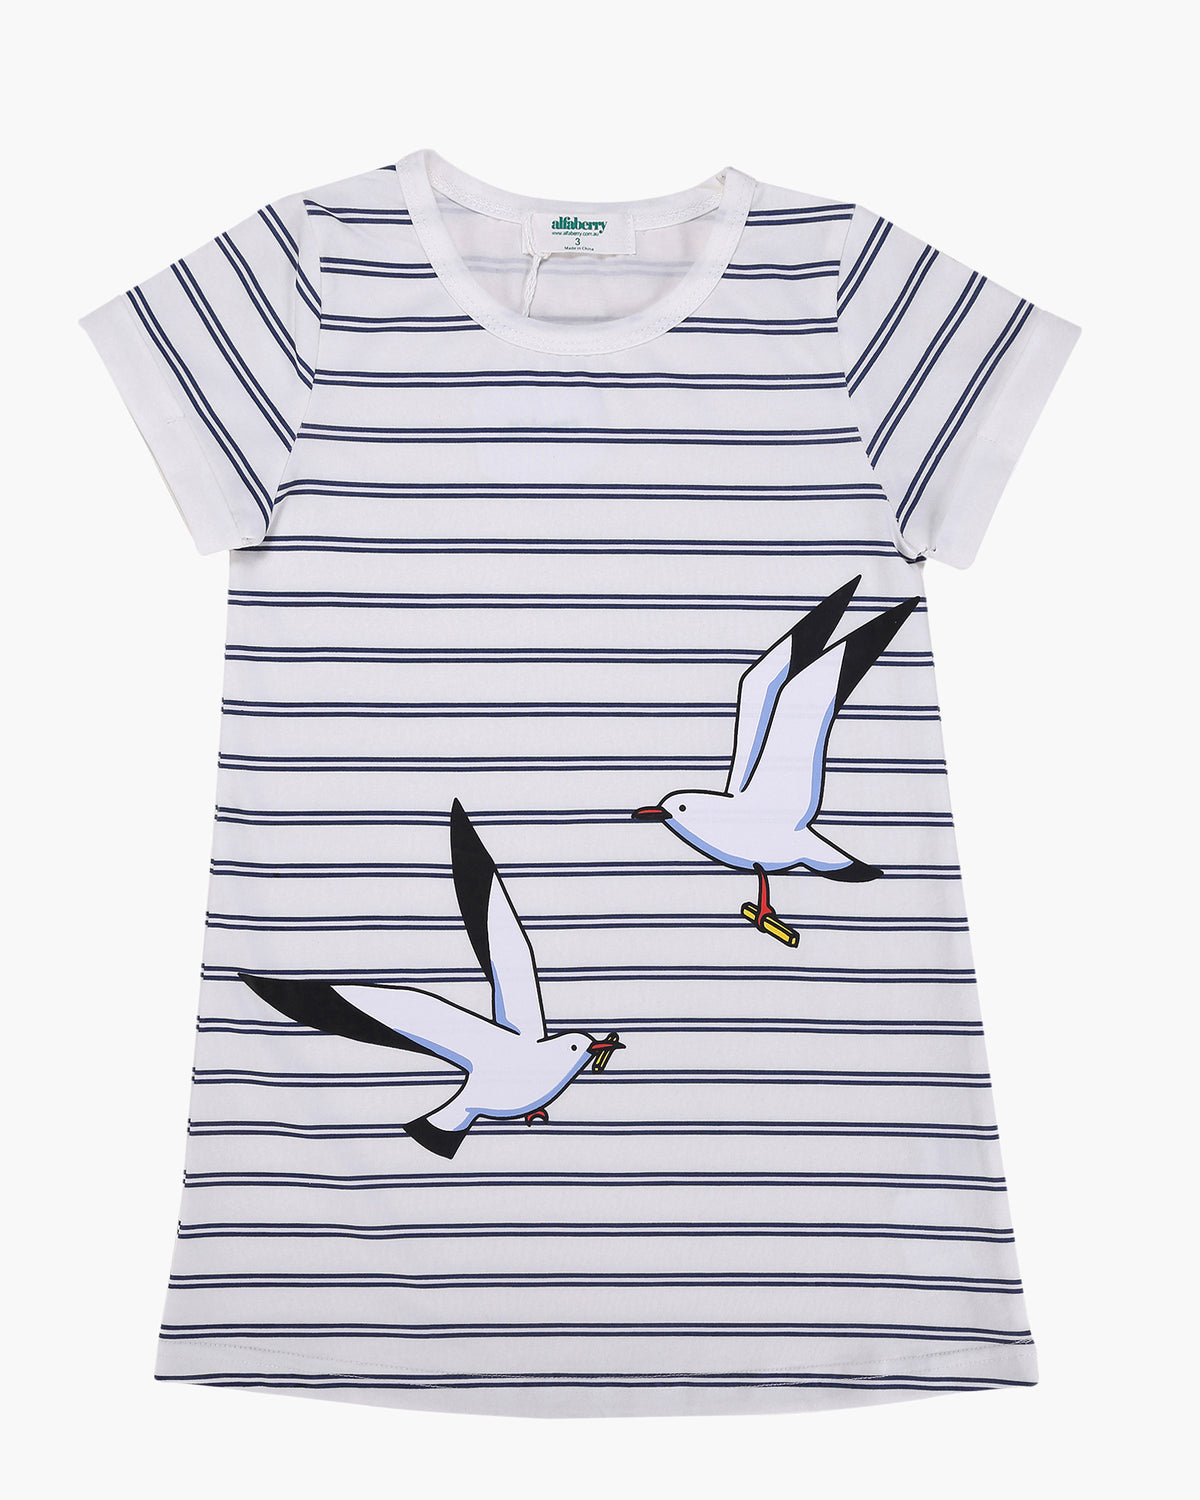 T-Shirt Dress in Seagulls &amp; Stripes Print Navy Front